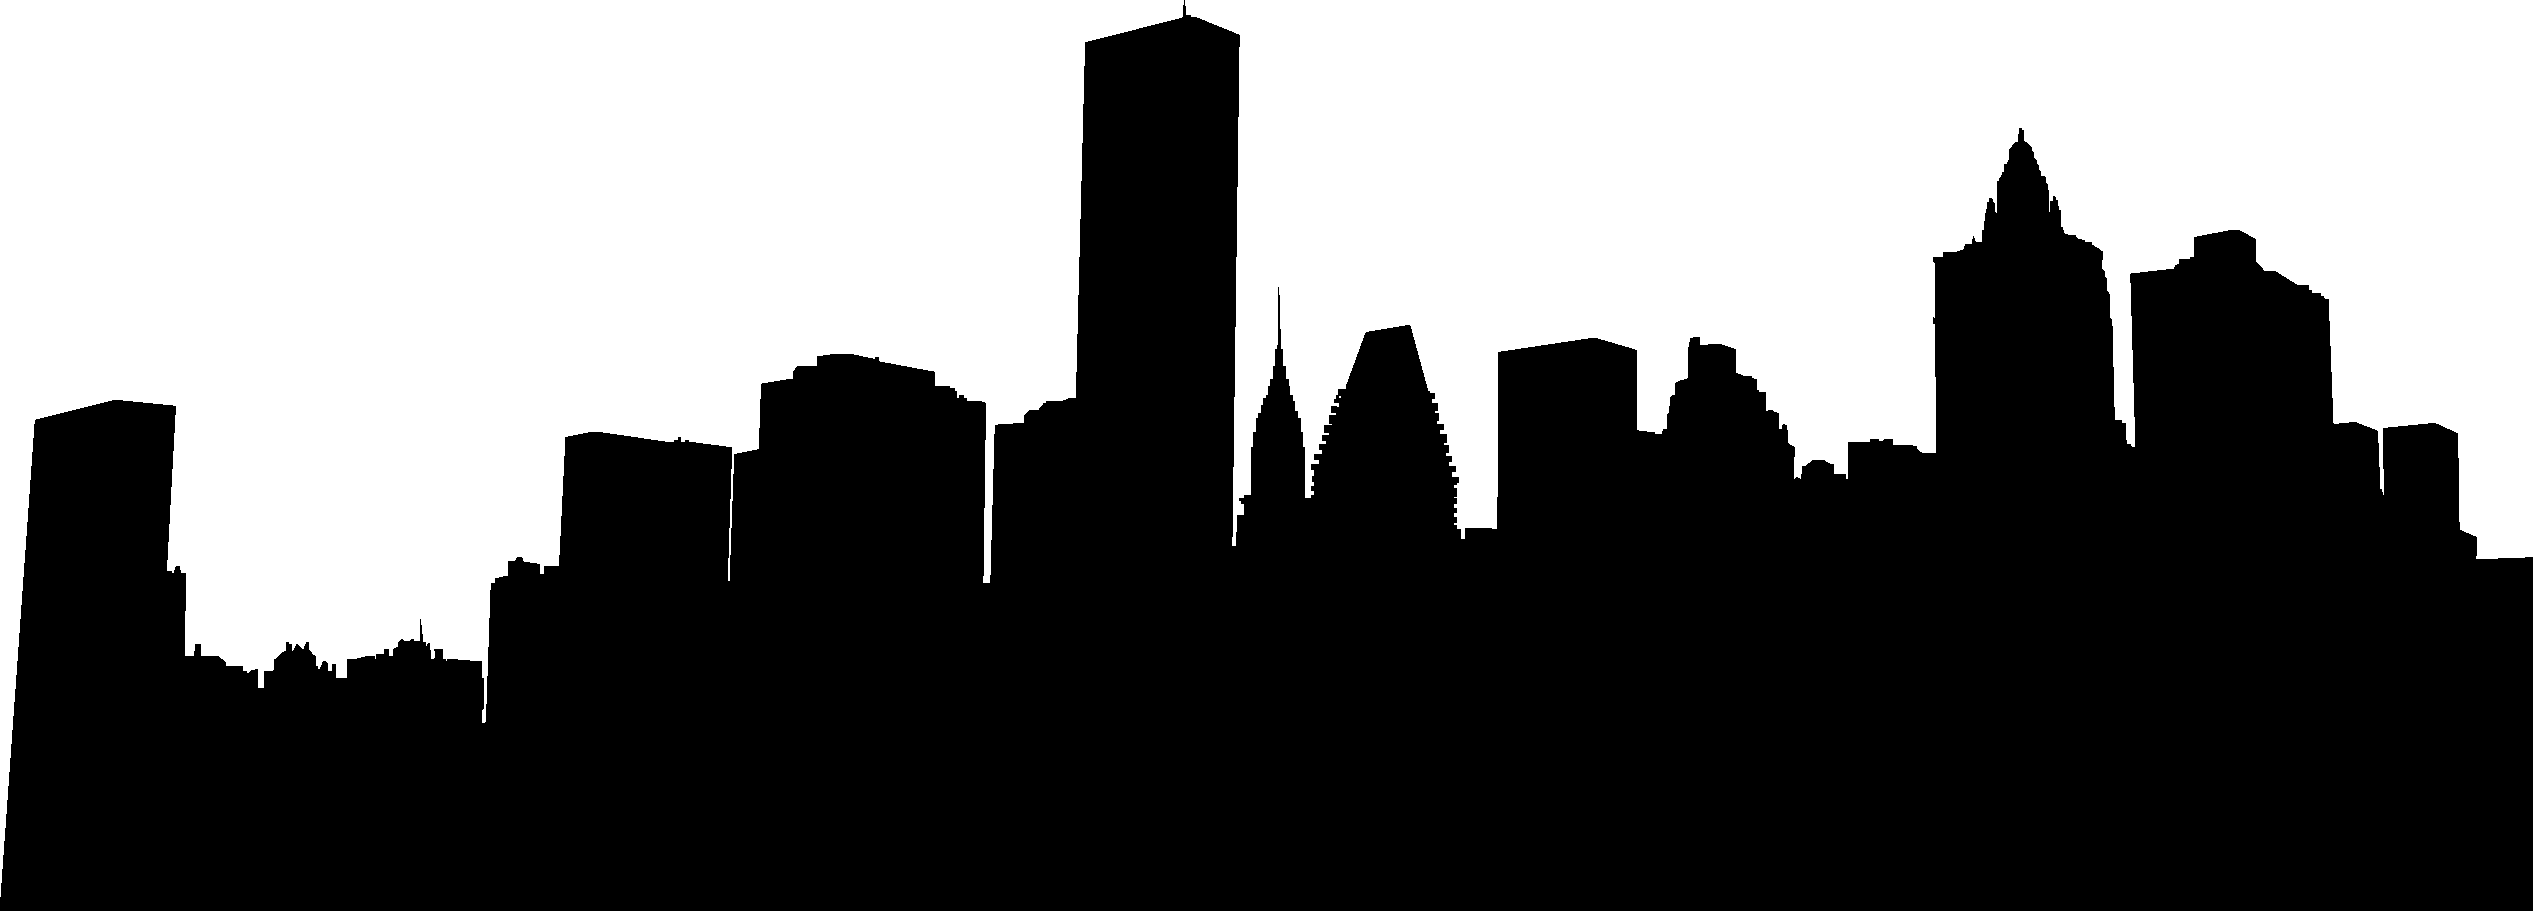 City Skyline Silhouette 02 png